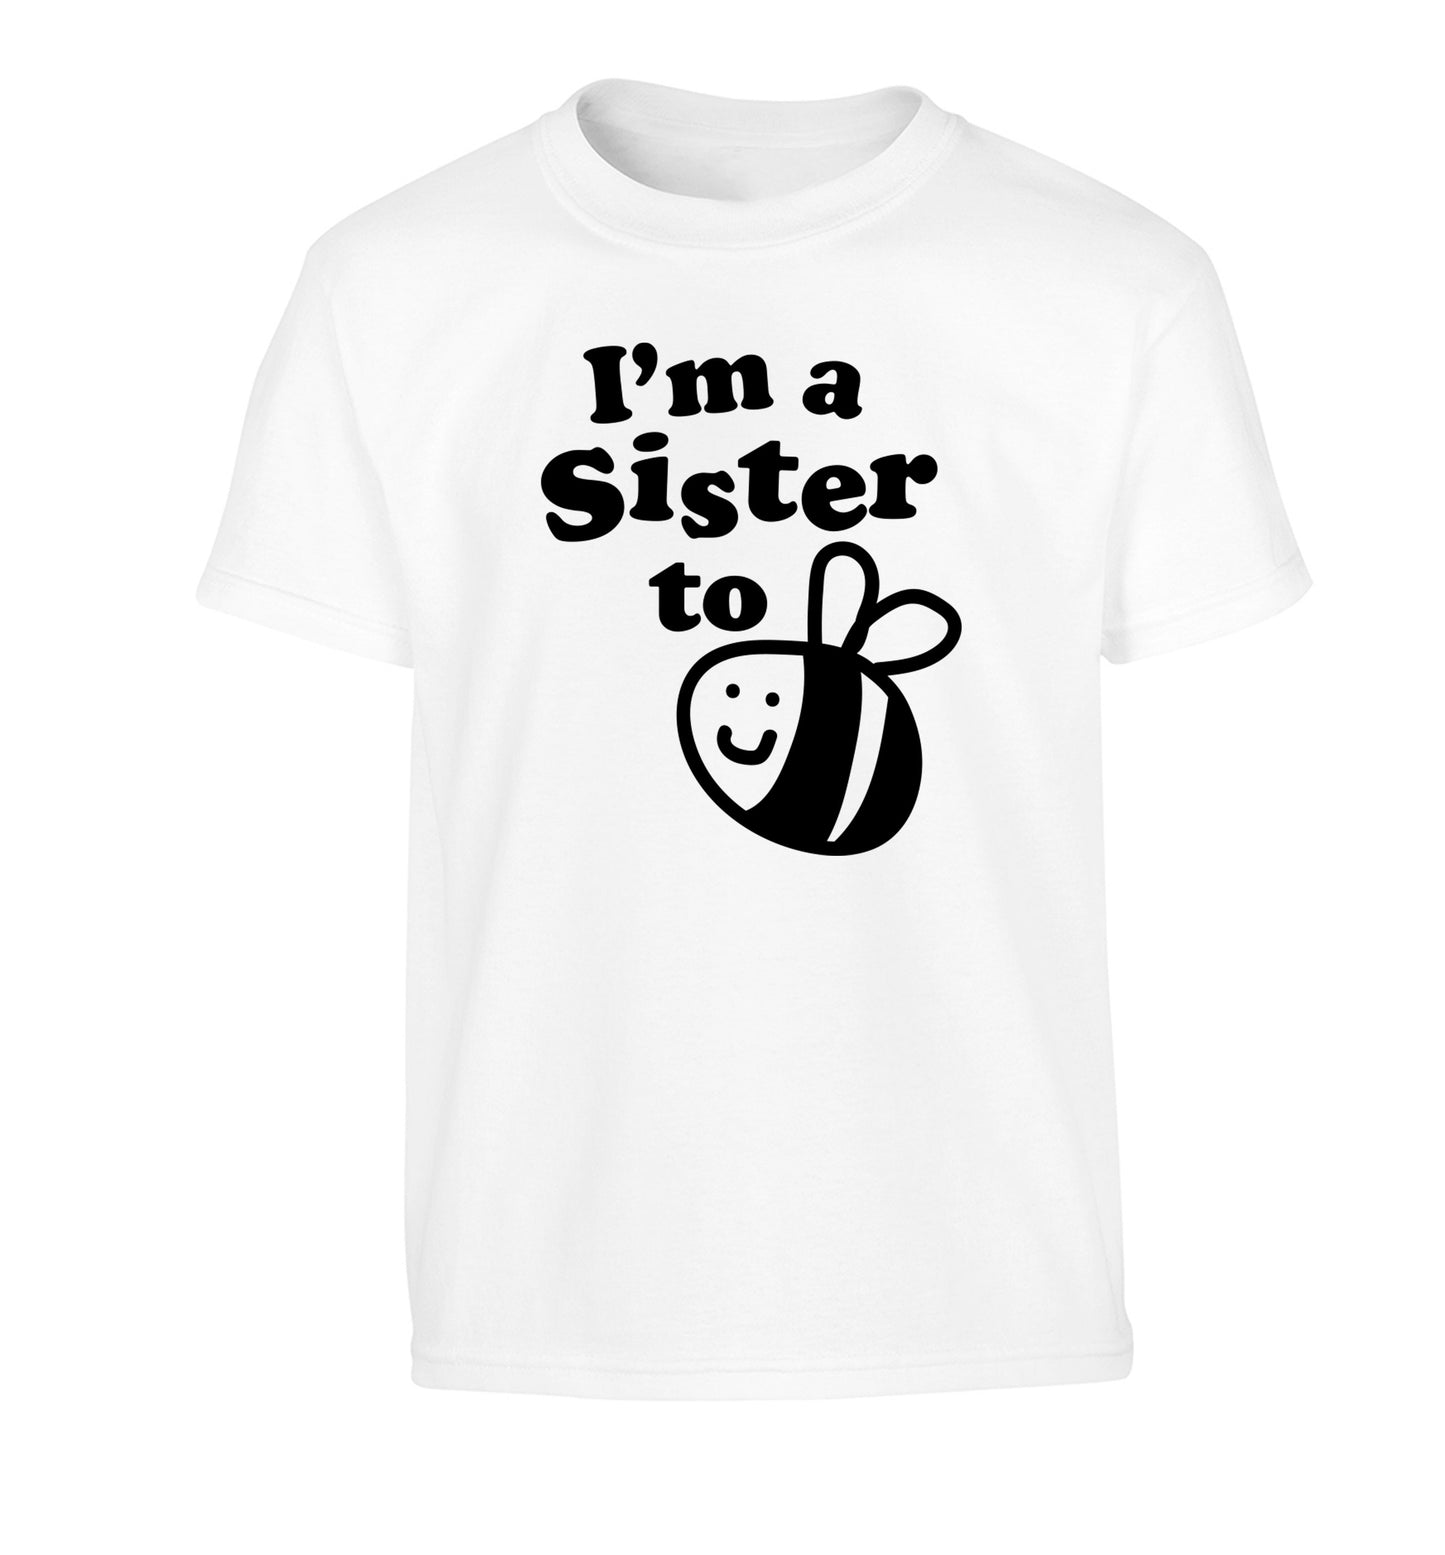 I'm a sister to be Children's white Tshirt 12-14 Years